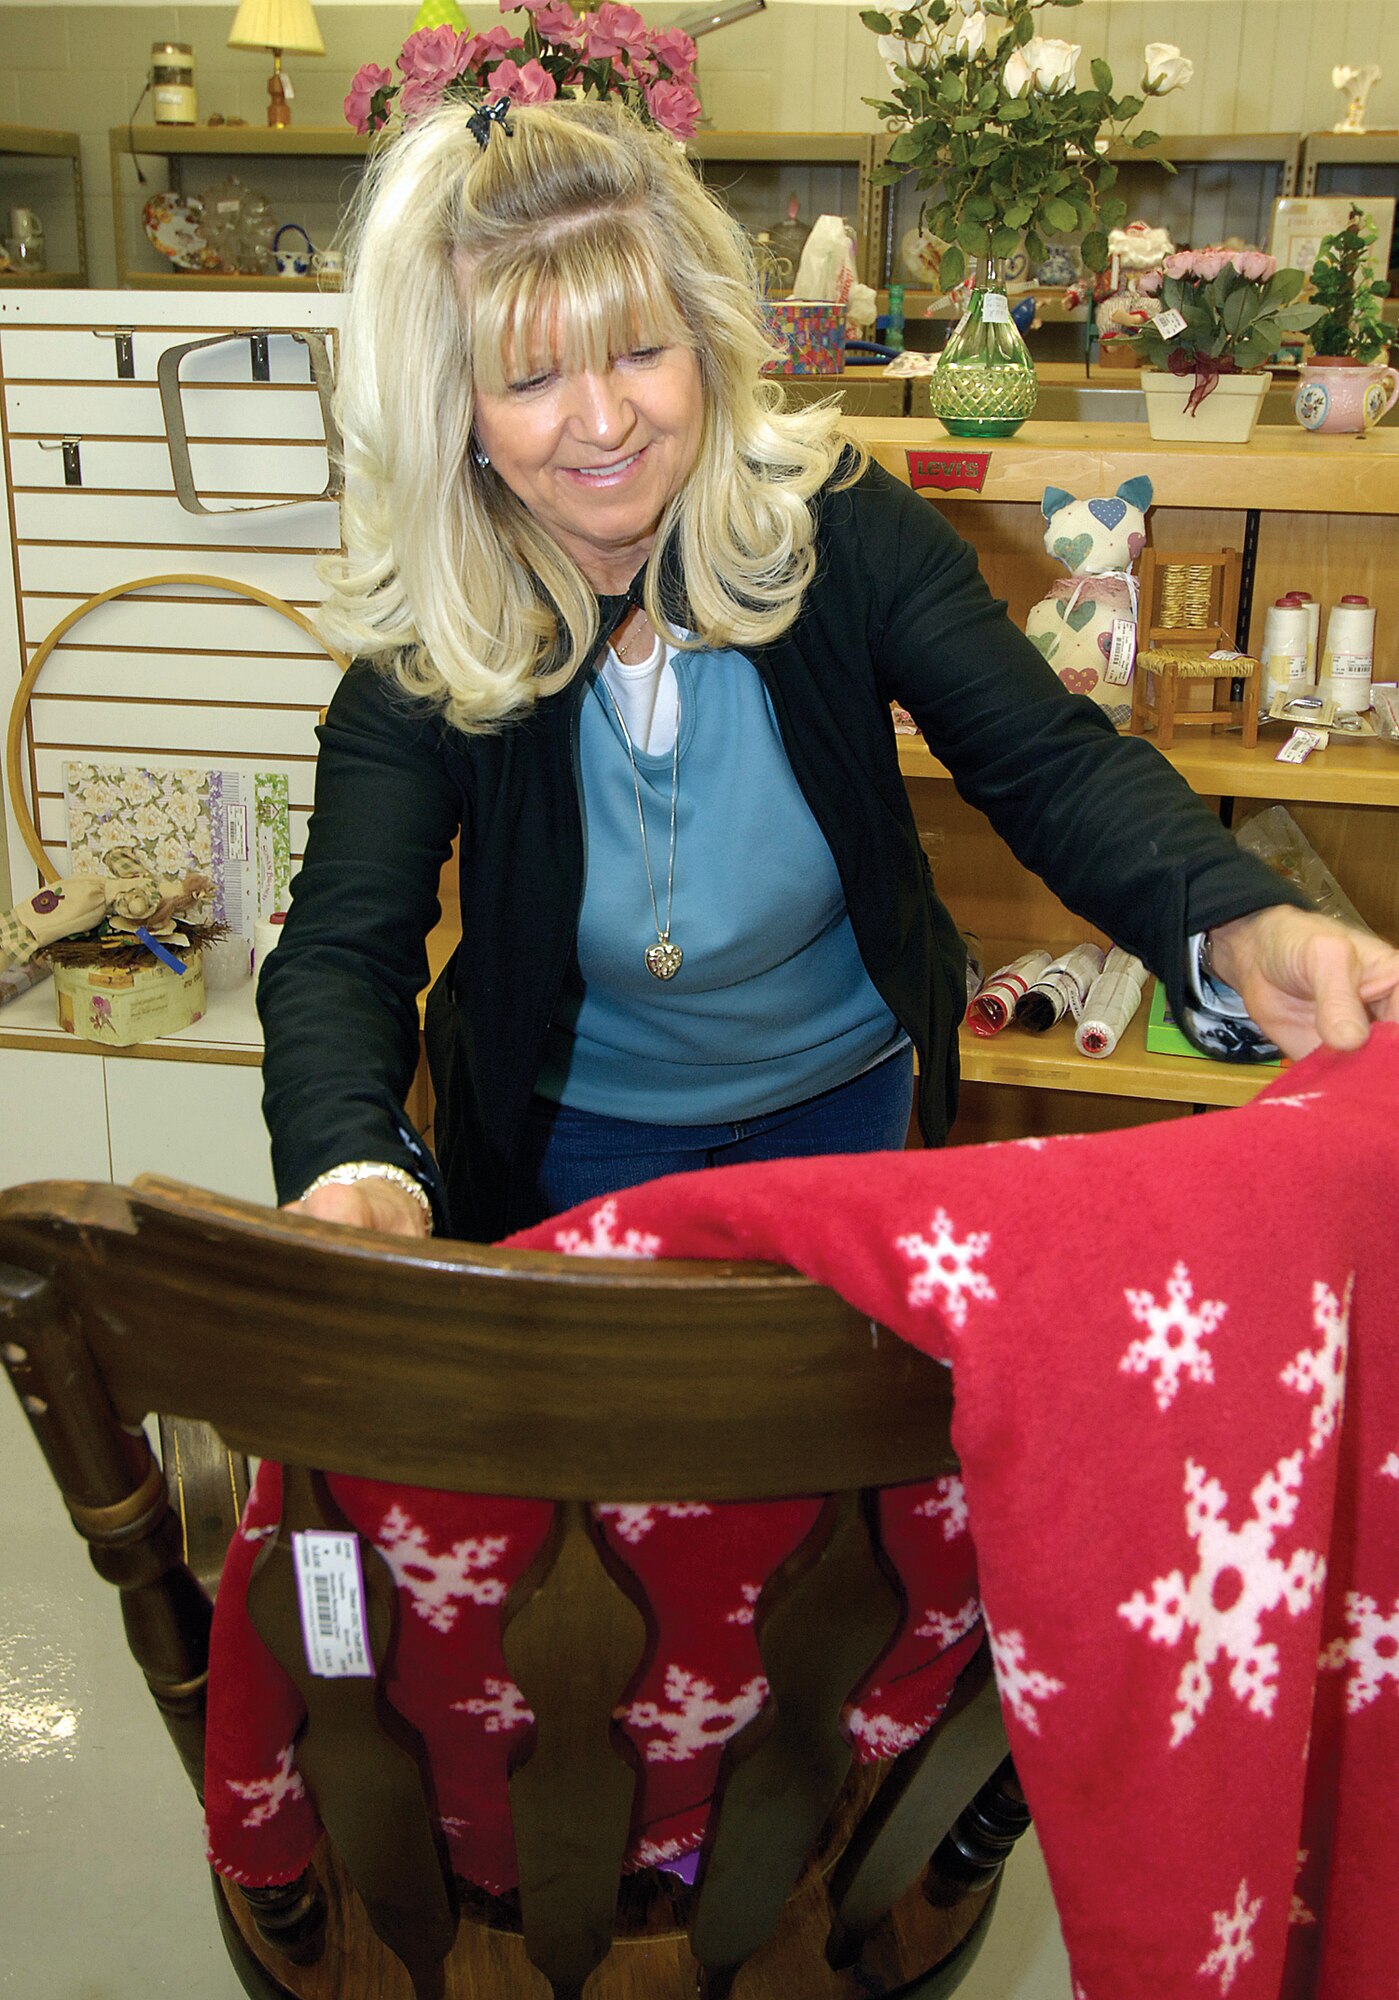 Tinker Thrift Shop volunteer Janie Hardin makes a holiday throw and a wooden rocker more inviting for potential shoppers in the thrift shop’s furniture area recently.  Ms. Hardin consigned items for years then became a volunteer in the shop more than four years ago. (Air Force photos by Margo Wright )